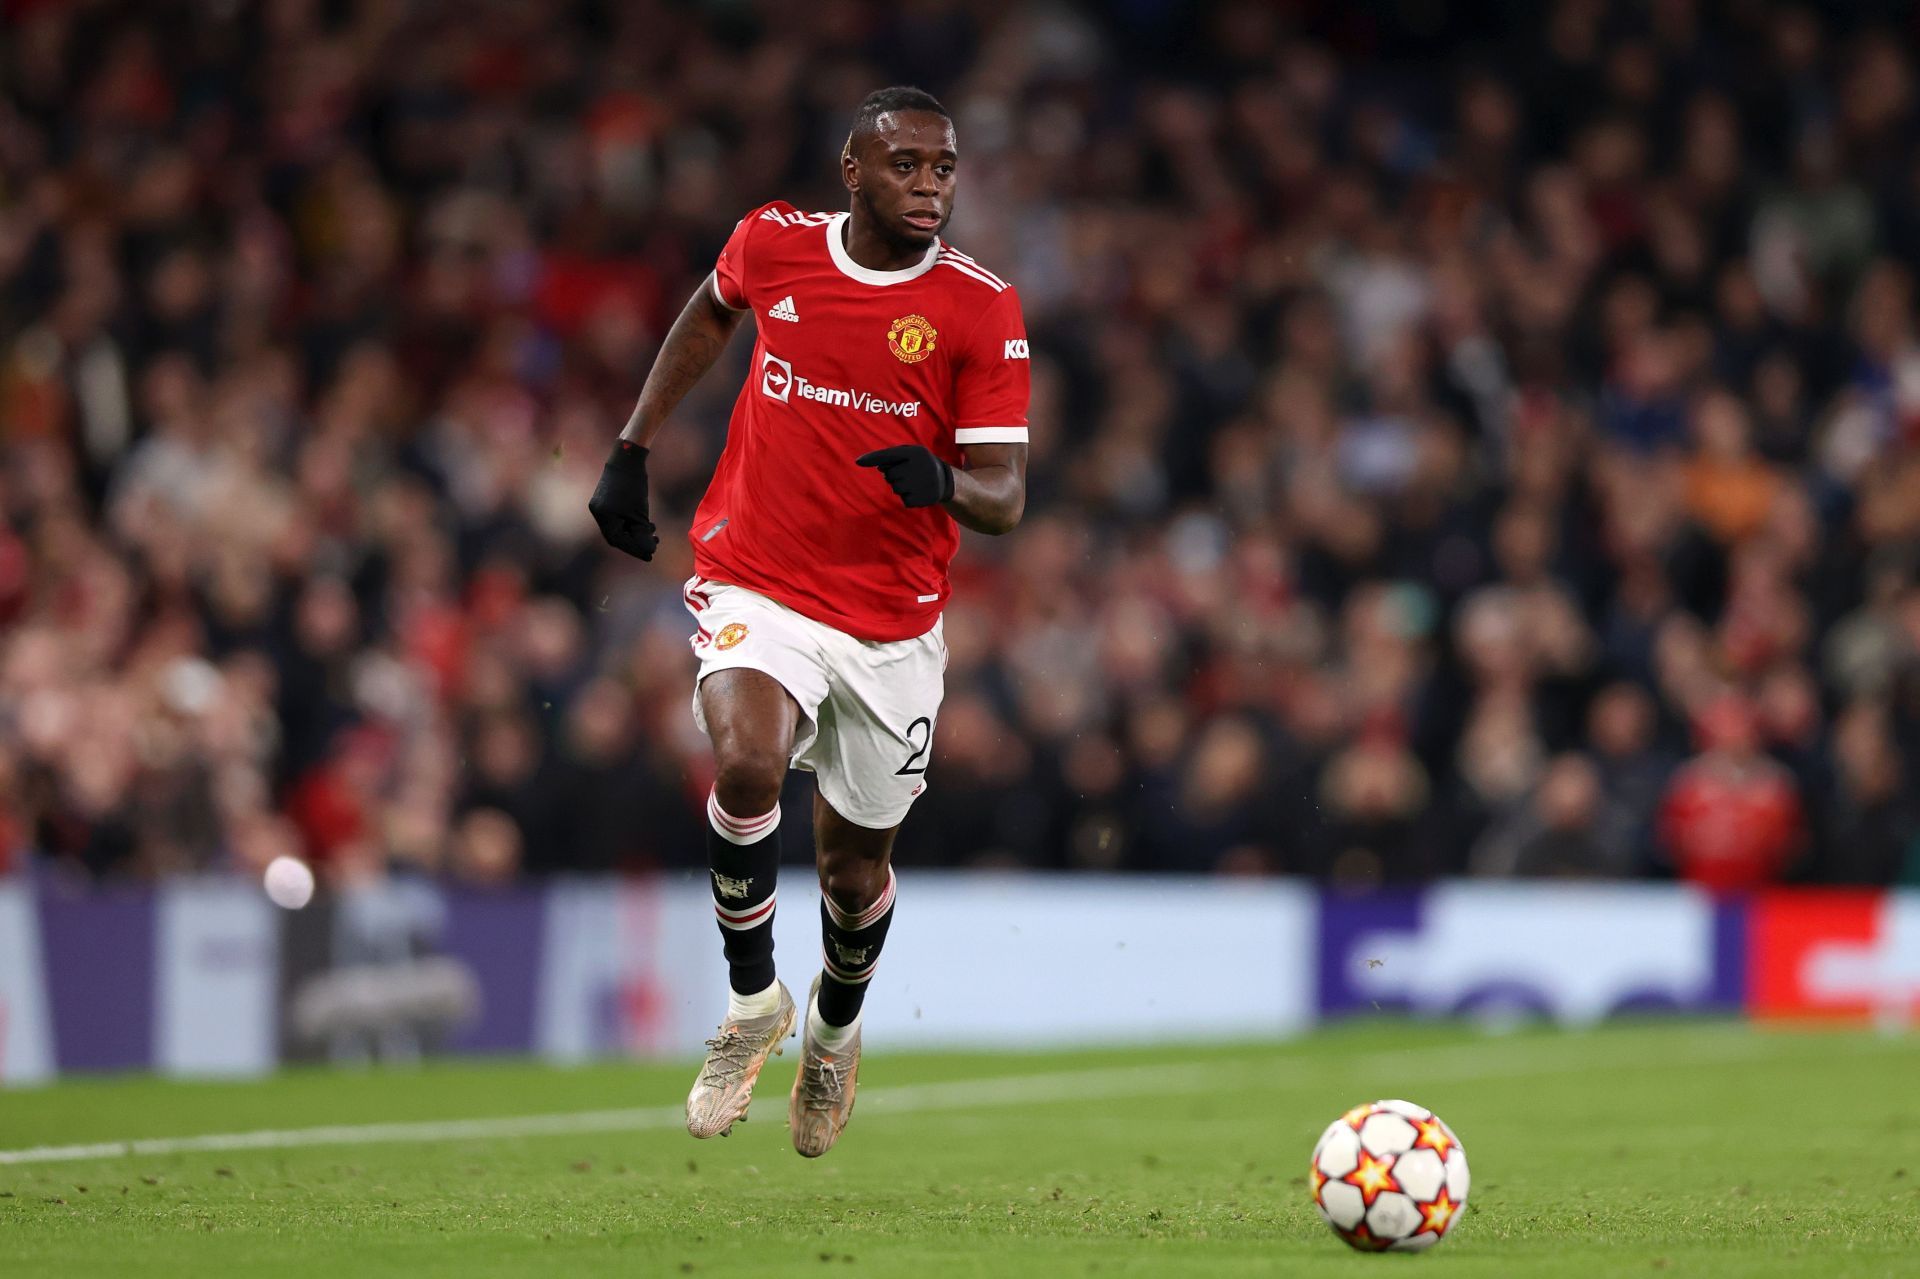 Aaron Wan-Bissaka will be a key player for Manchester United against Manchester City